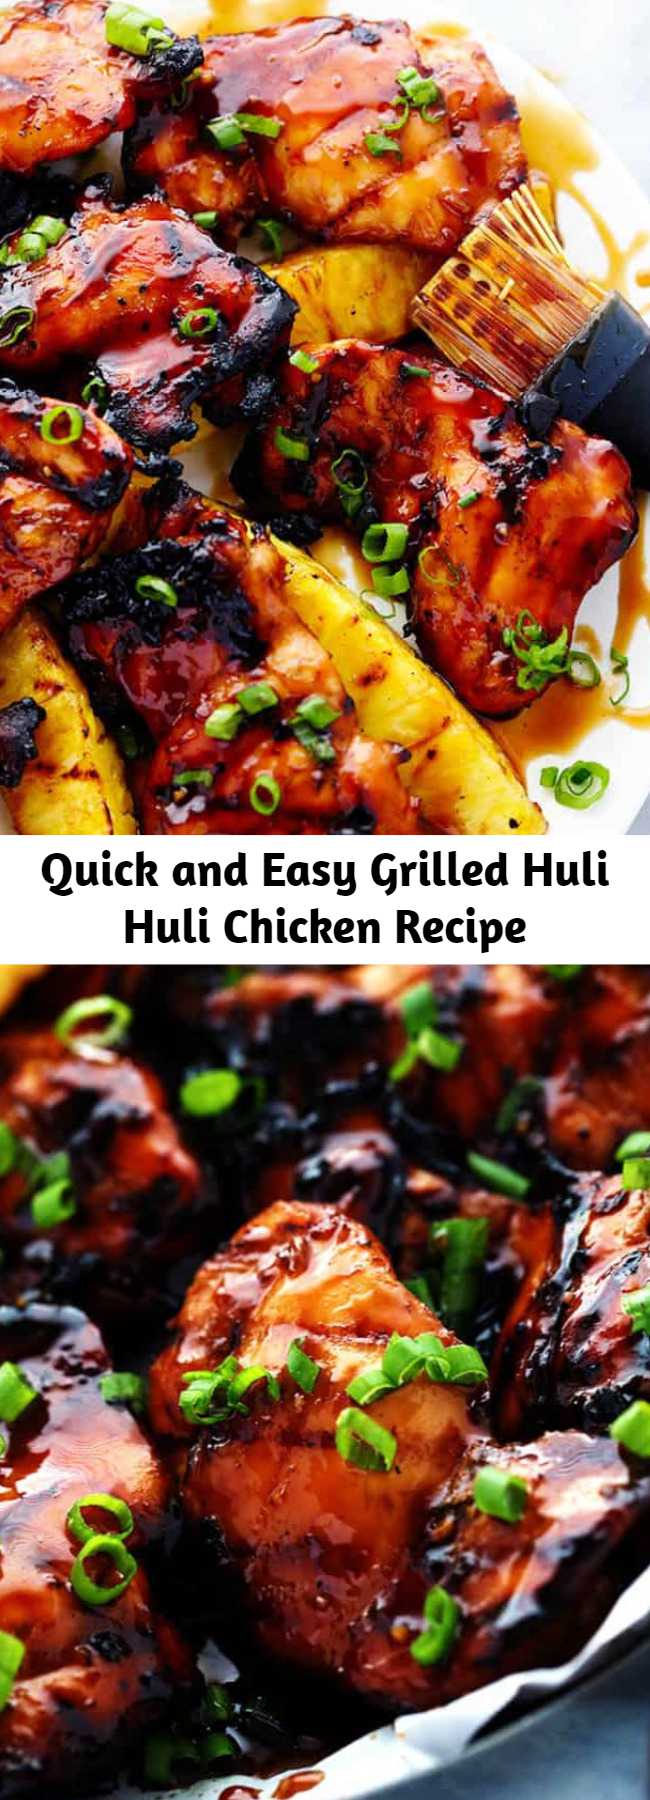 Quick and Easy Grilled Huli Huli Chicken Recipe - Grilled Huli Huli Chicken is a five star recipe! The marinade is quick and easy and full of such amazing flavor! You will make this again and again!